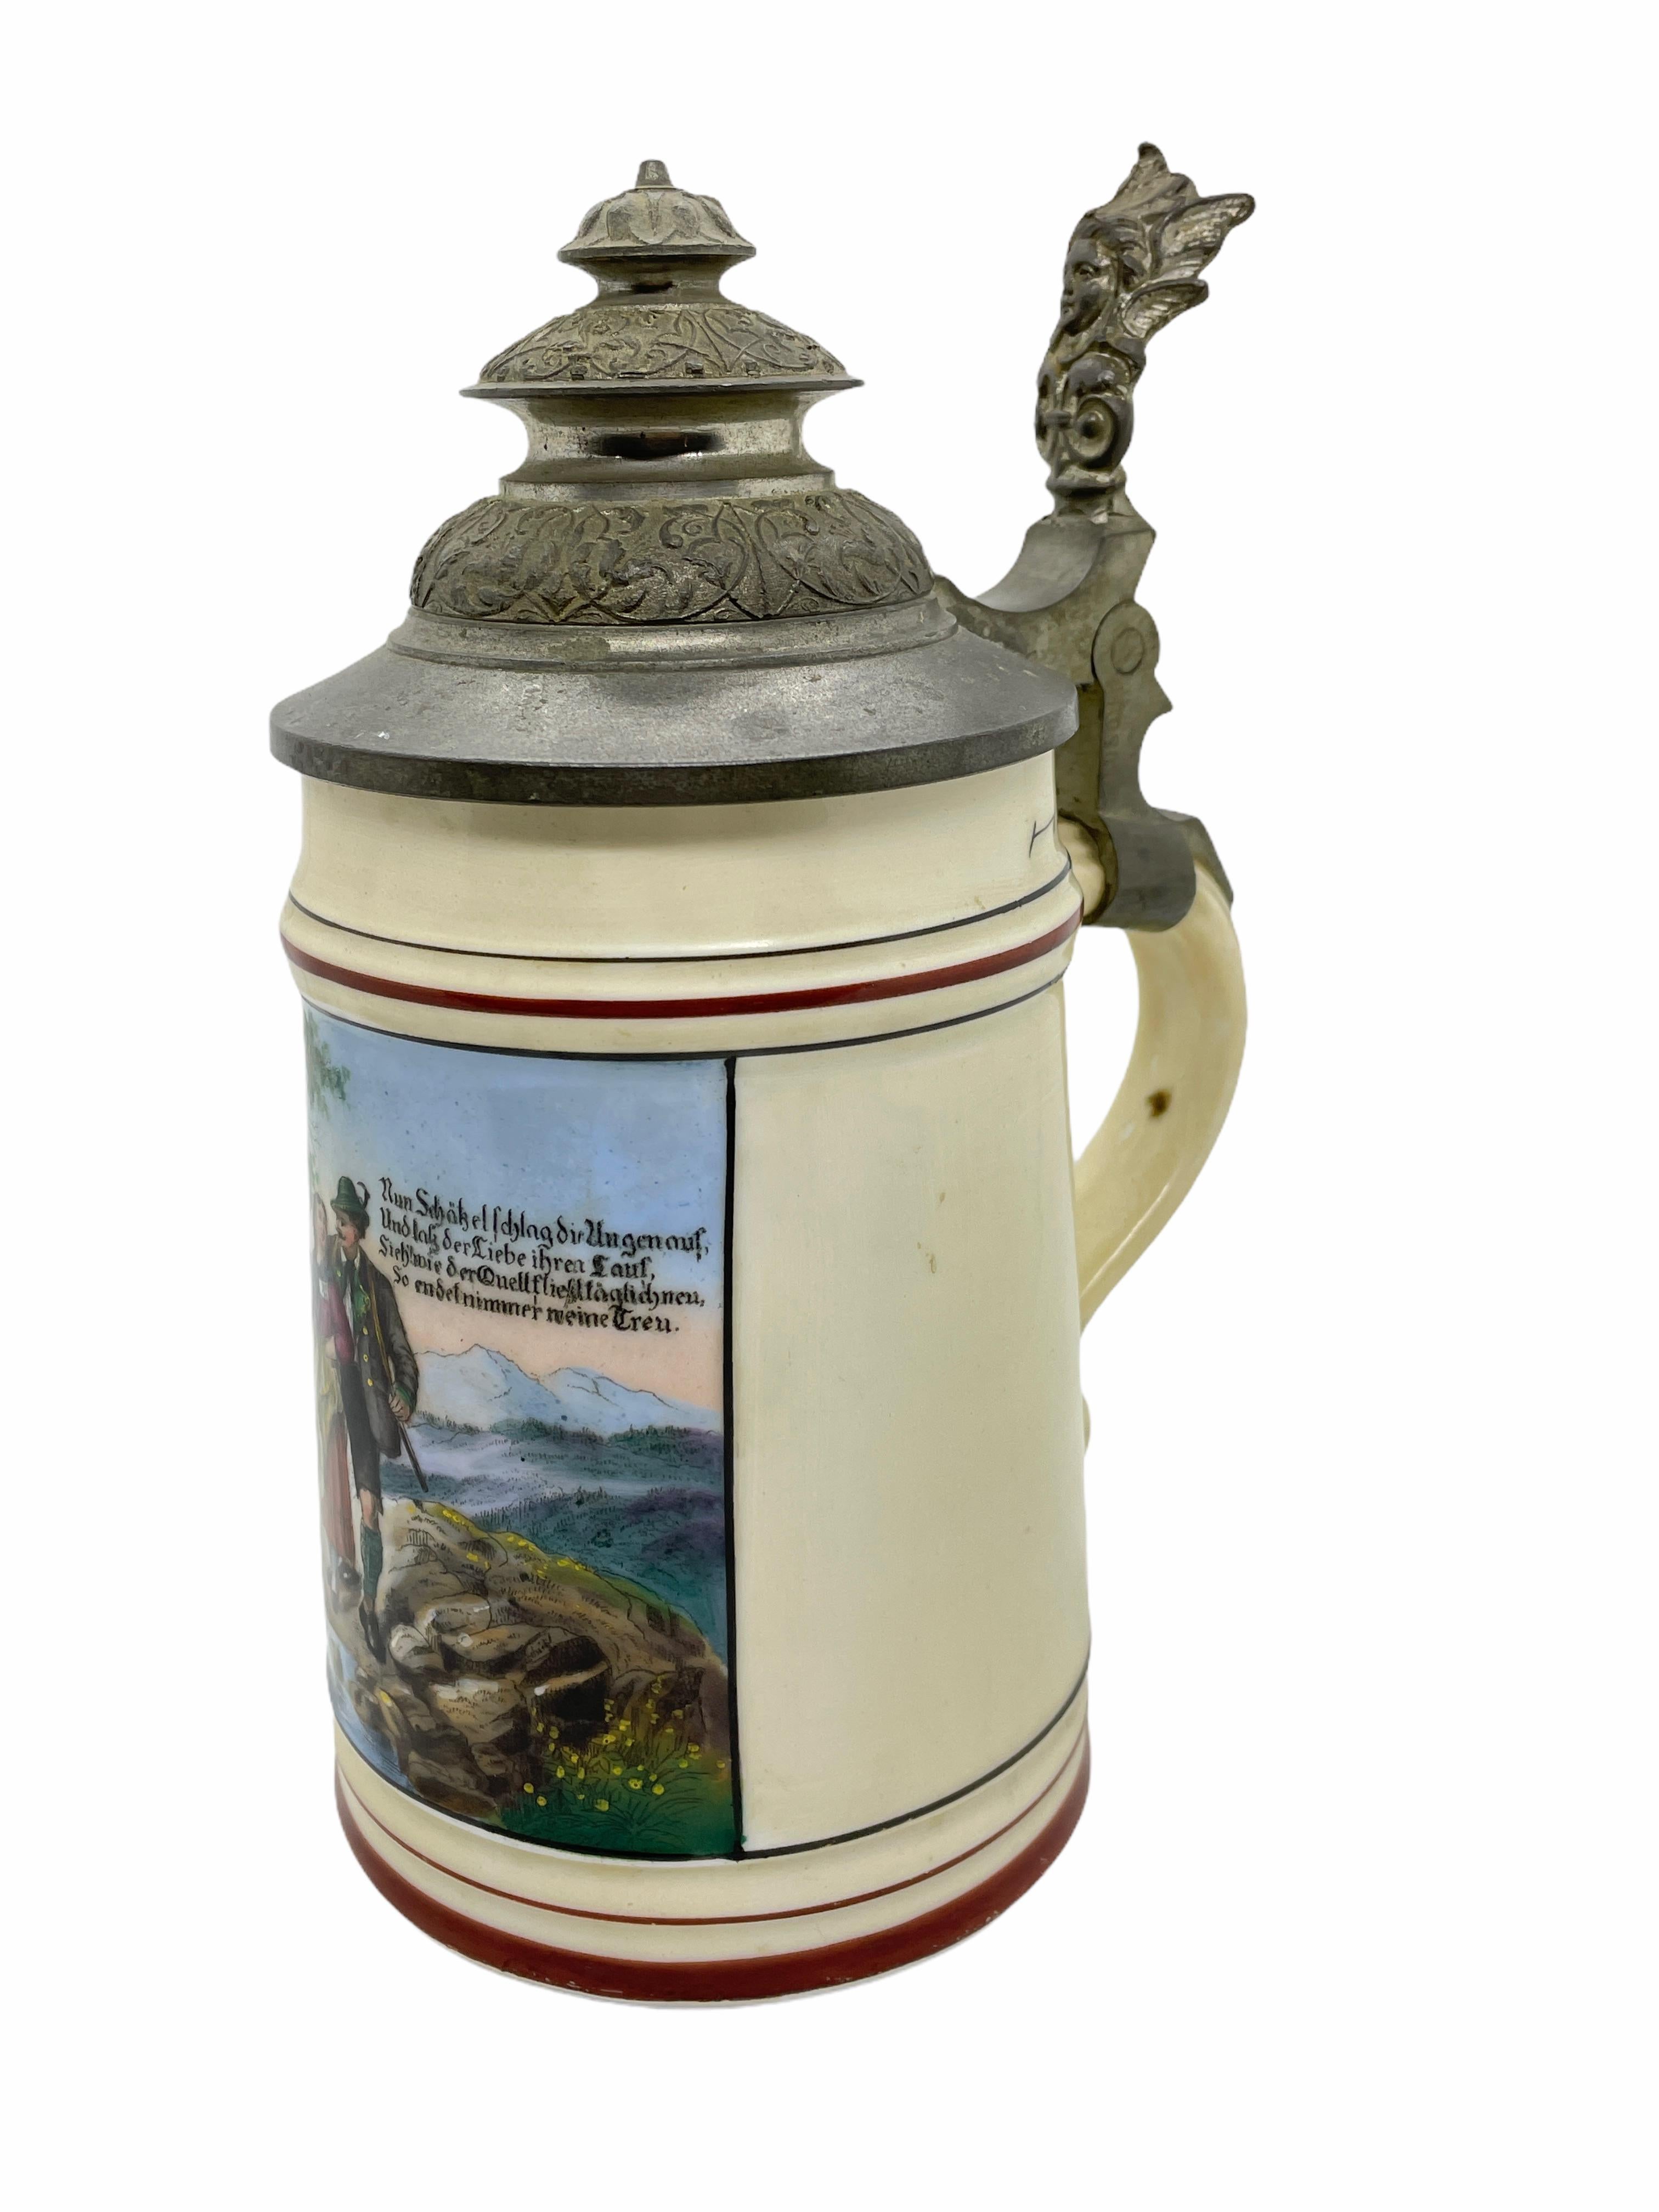 A gorgeous beer stein, made in Germany. This beer stein has been made in Germany, circa 1900s or older. Absolutely gorgeous piece still in great condition, without damage. Lid works properly. It is a 1/2 Liter Stein. Has a beautiful detailed Face